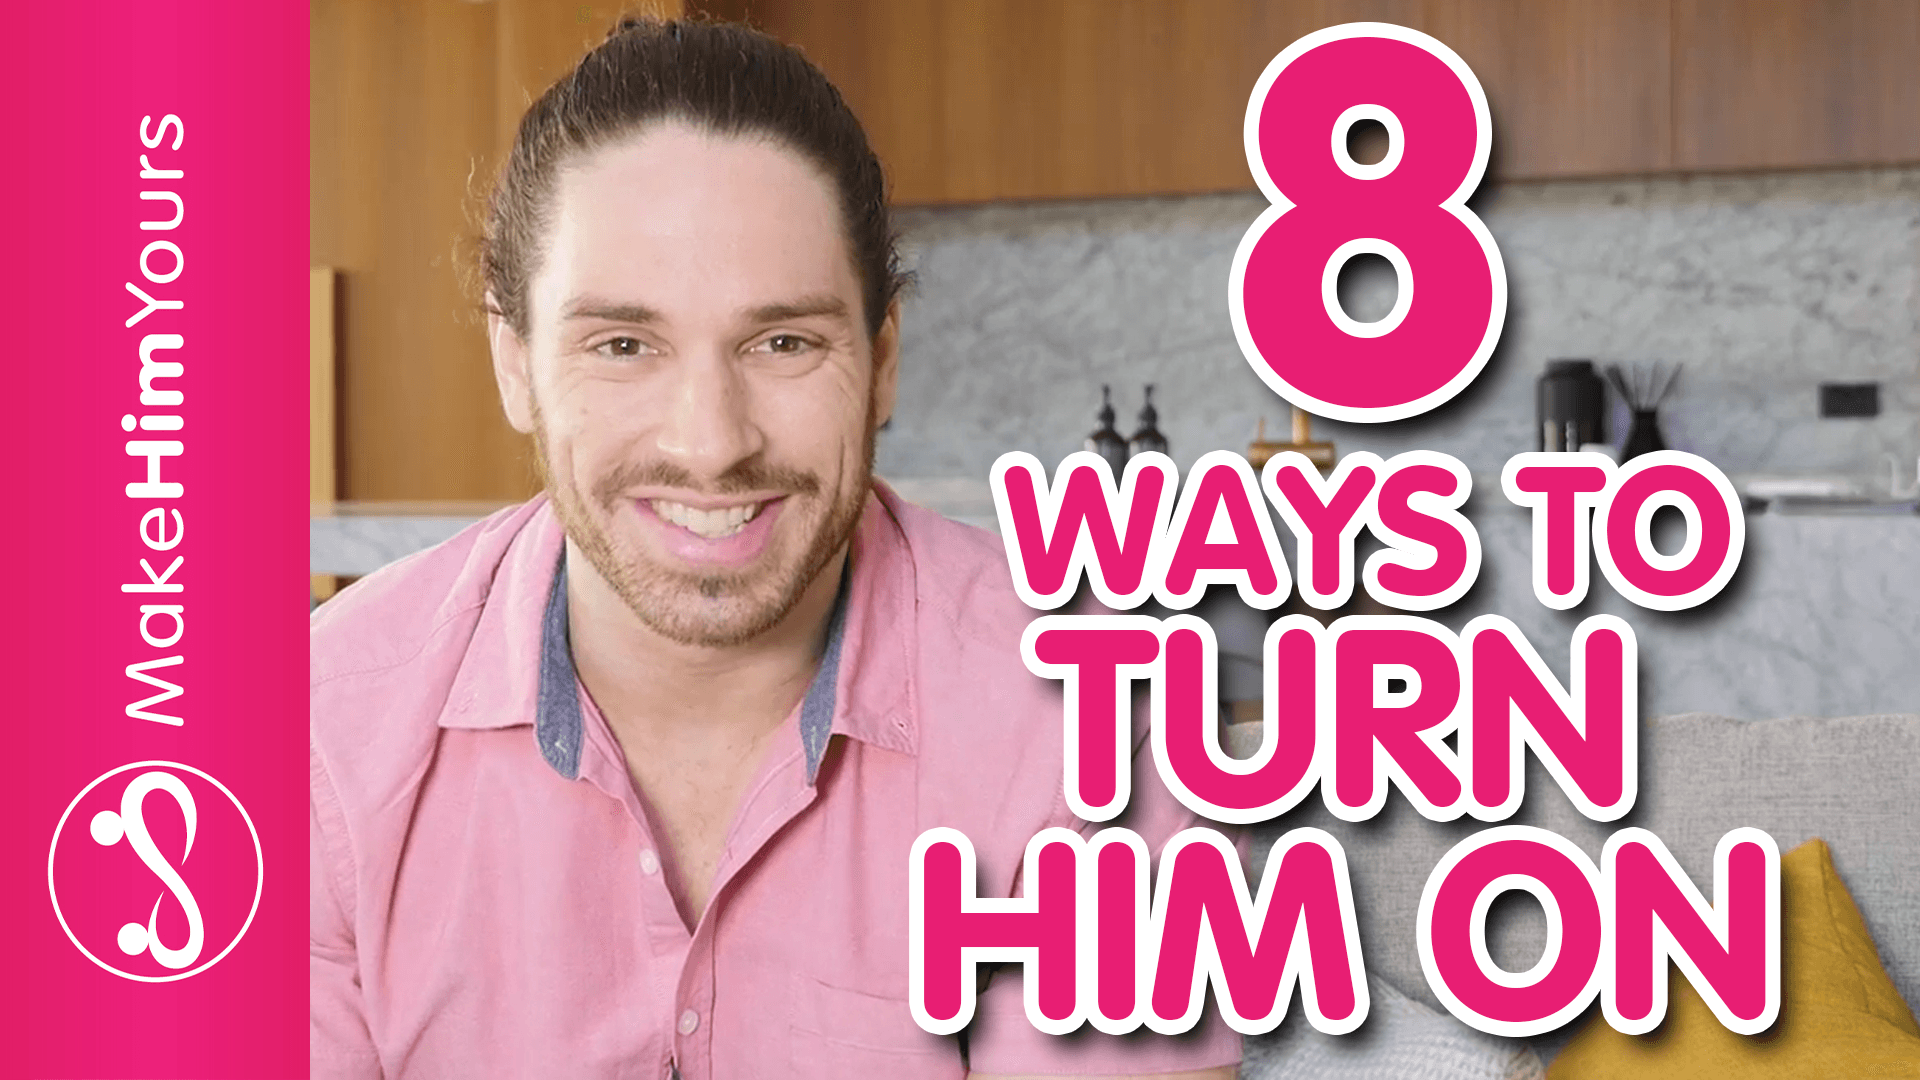 8 Sexy Things Girls Do That Turn Guys On Without Being